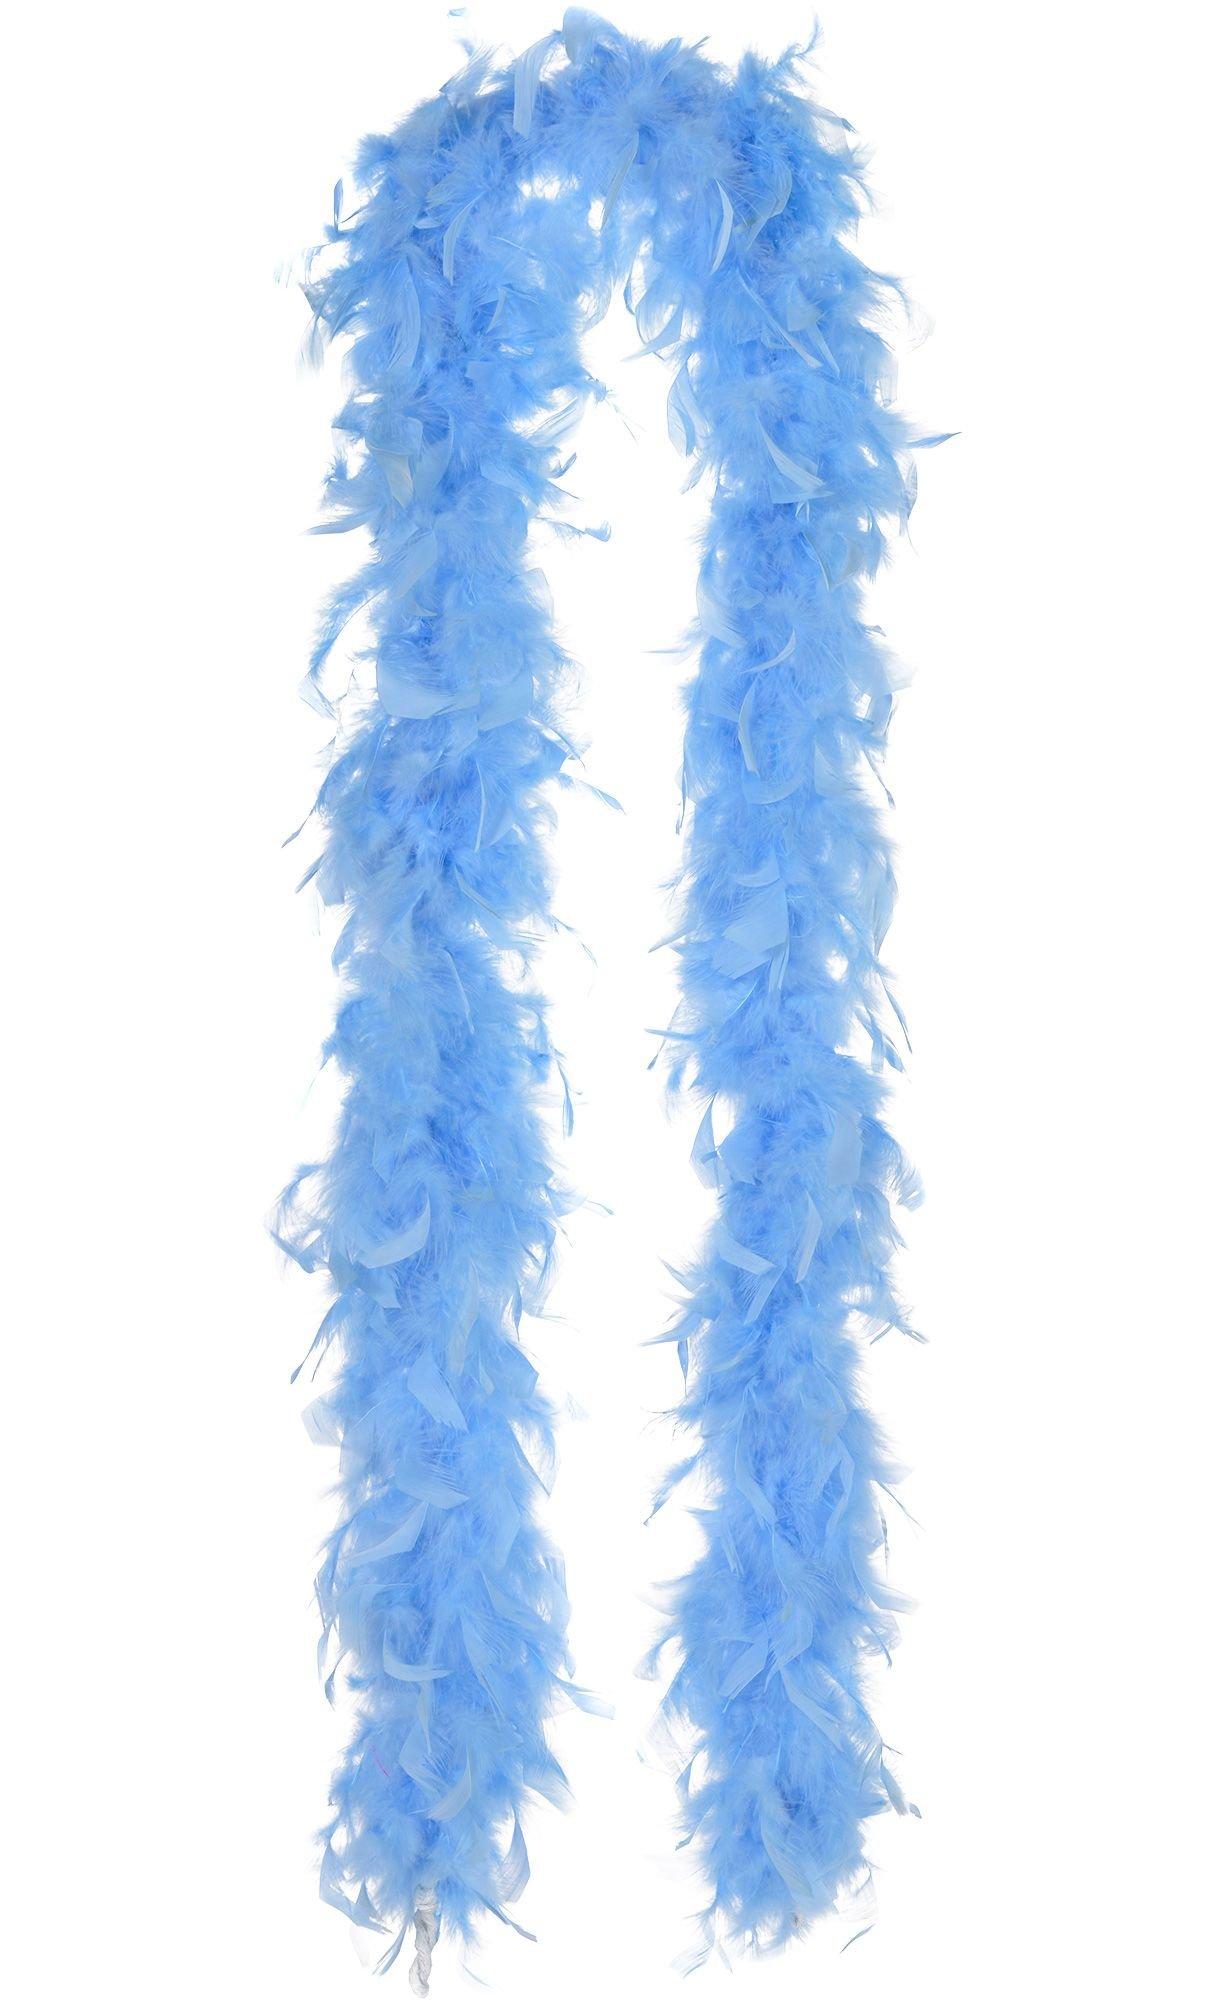 Premium Photo  A photo of a stunning arrangement of blue feathers